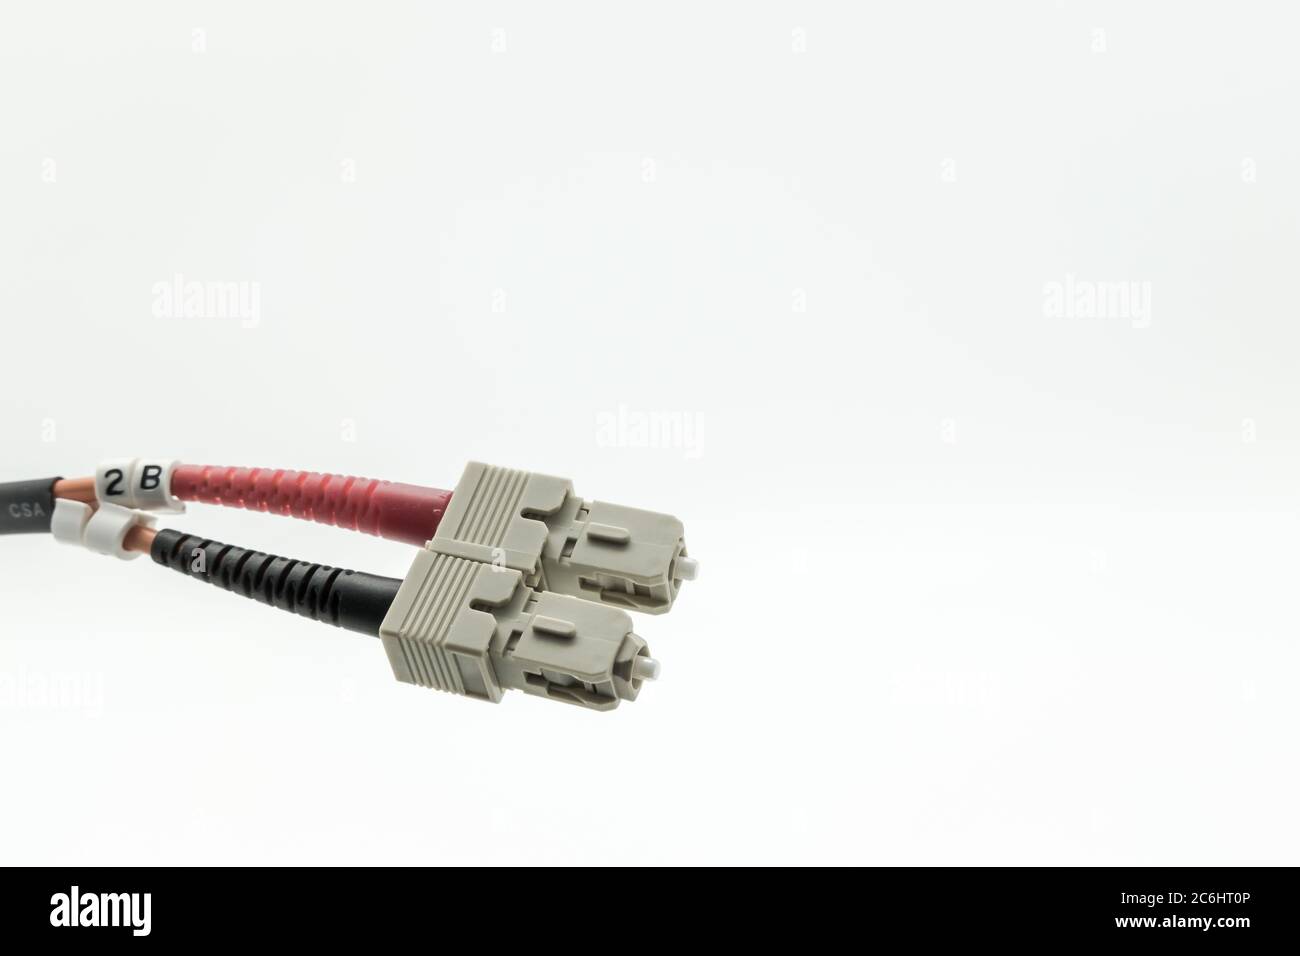 Macro image of super-fast Internet fibre optic patch leads used for high-speed, optical networking connections. Shown as a duplex pair of connectors. Stock Photo